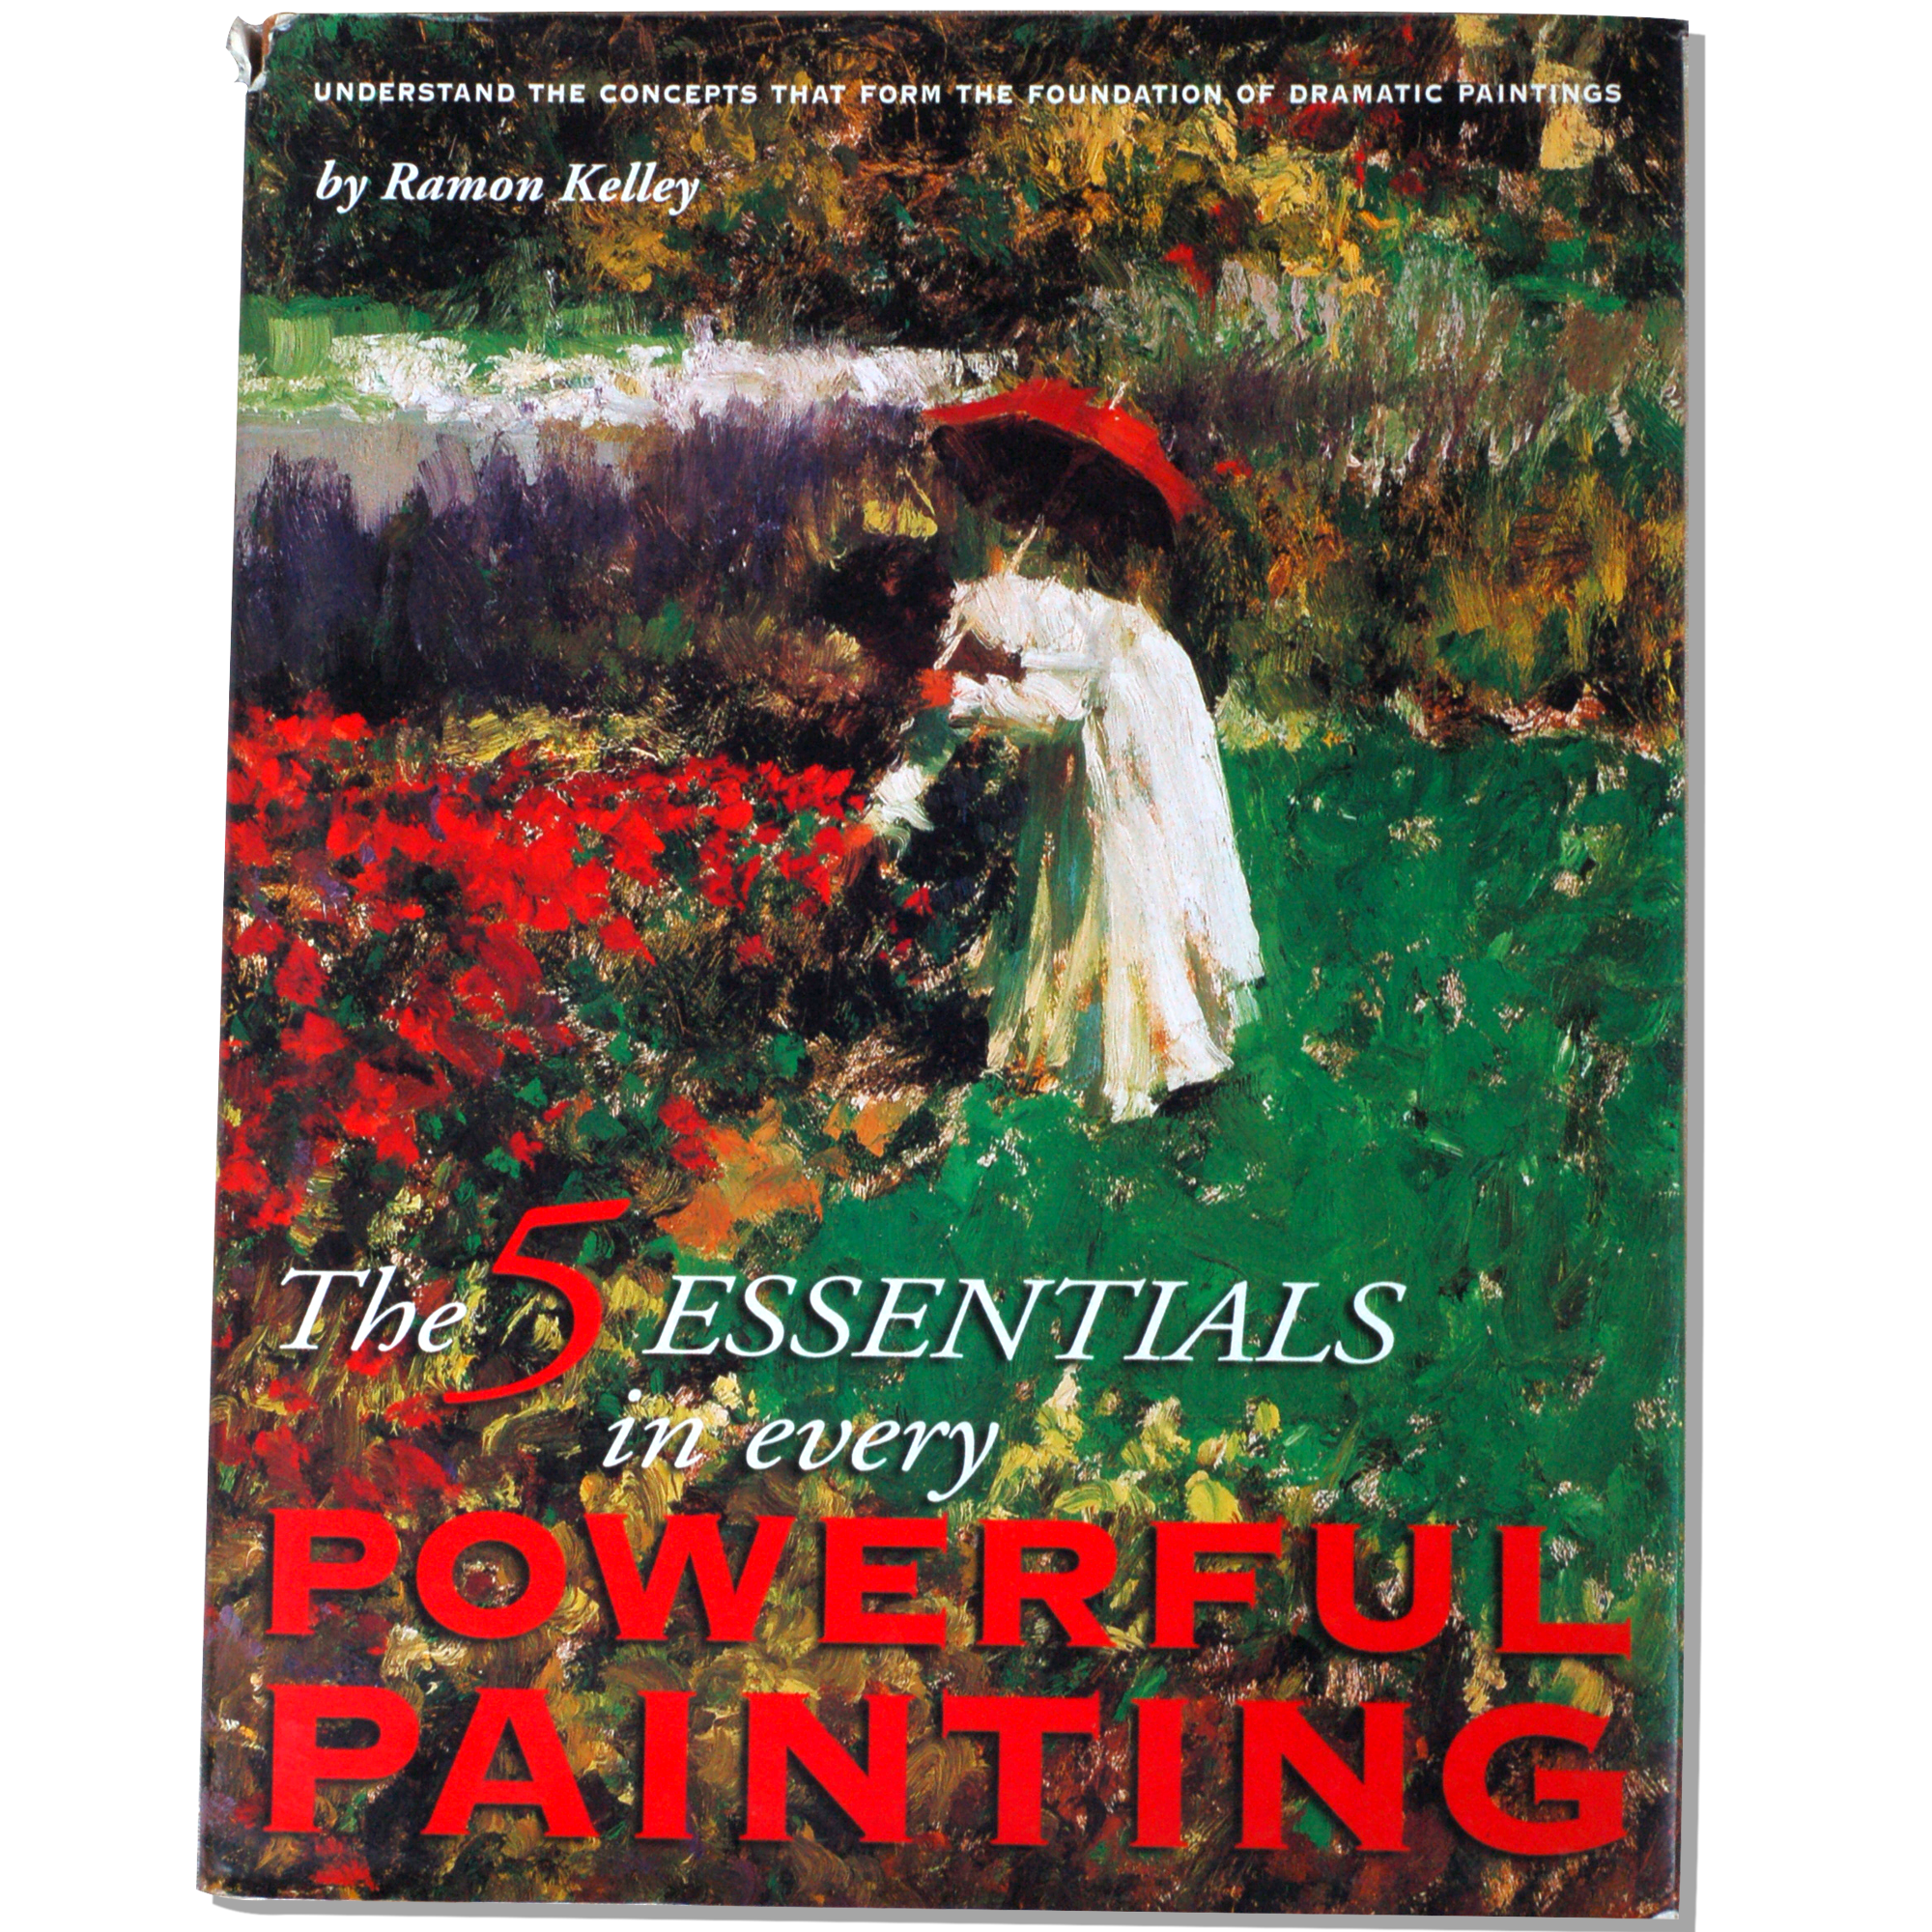 5 ESSENTIALS IN EVERY POWERFUL PAINTING